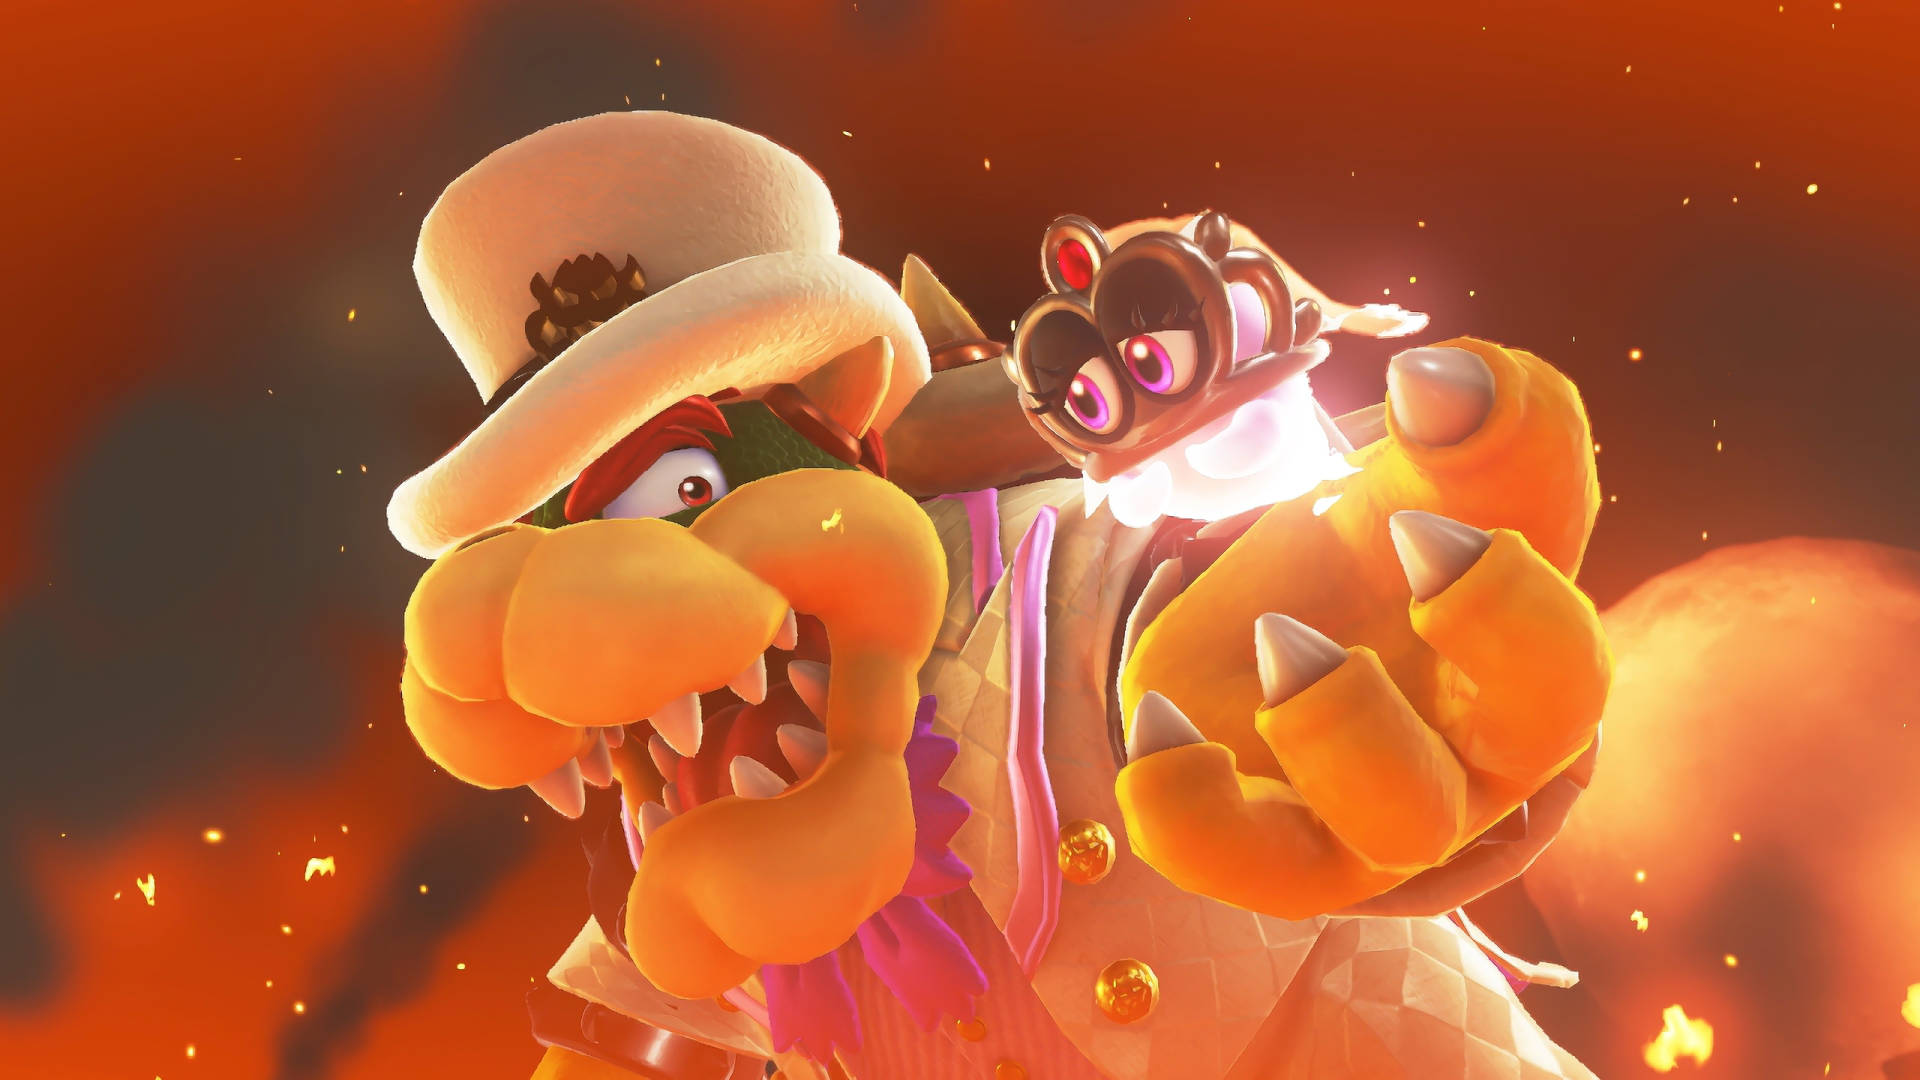 Super Mario Odyssey Bowser And Tiara In Flames Wallpaper